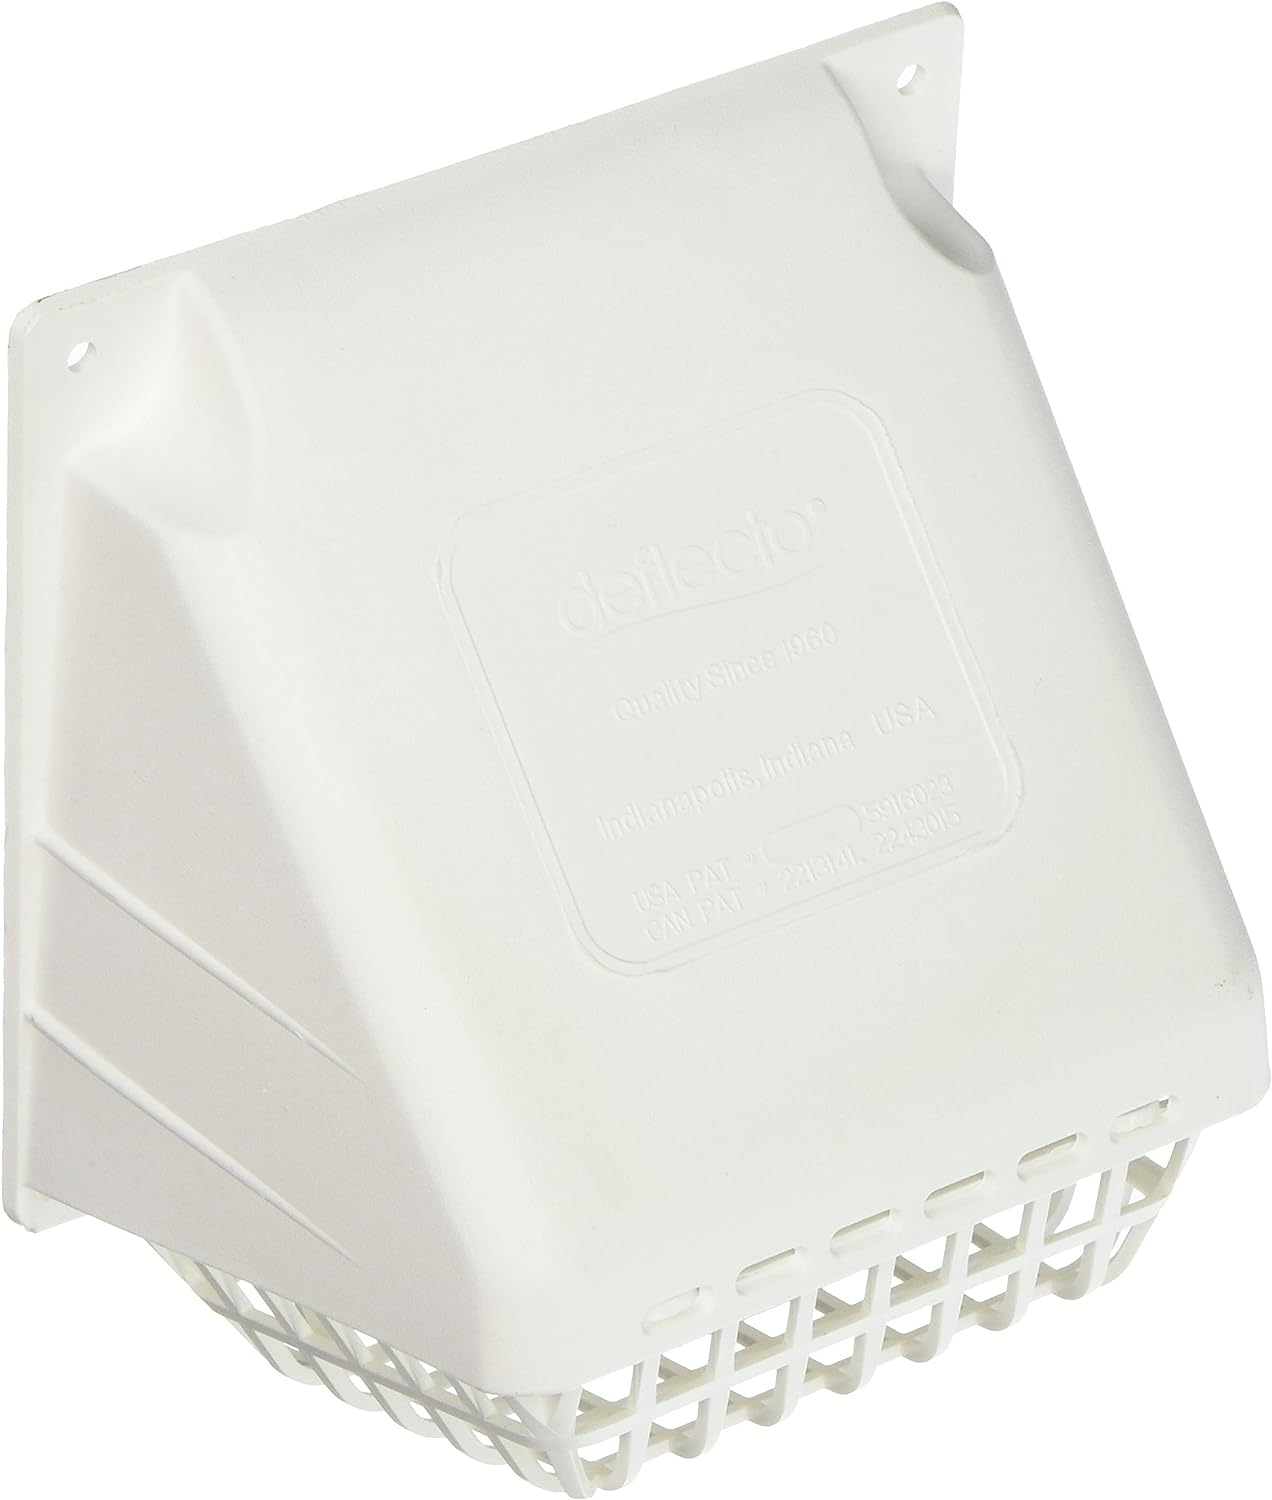 Deflecto HR4W Replacement Vent Hood - White